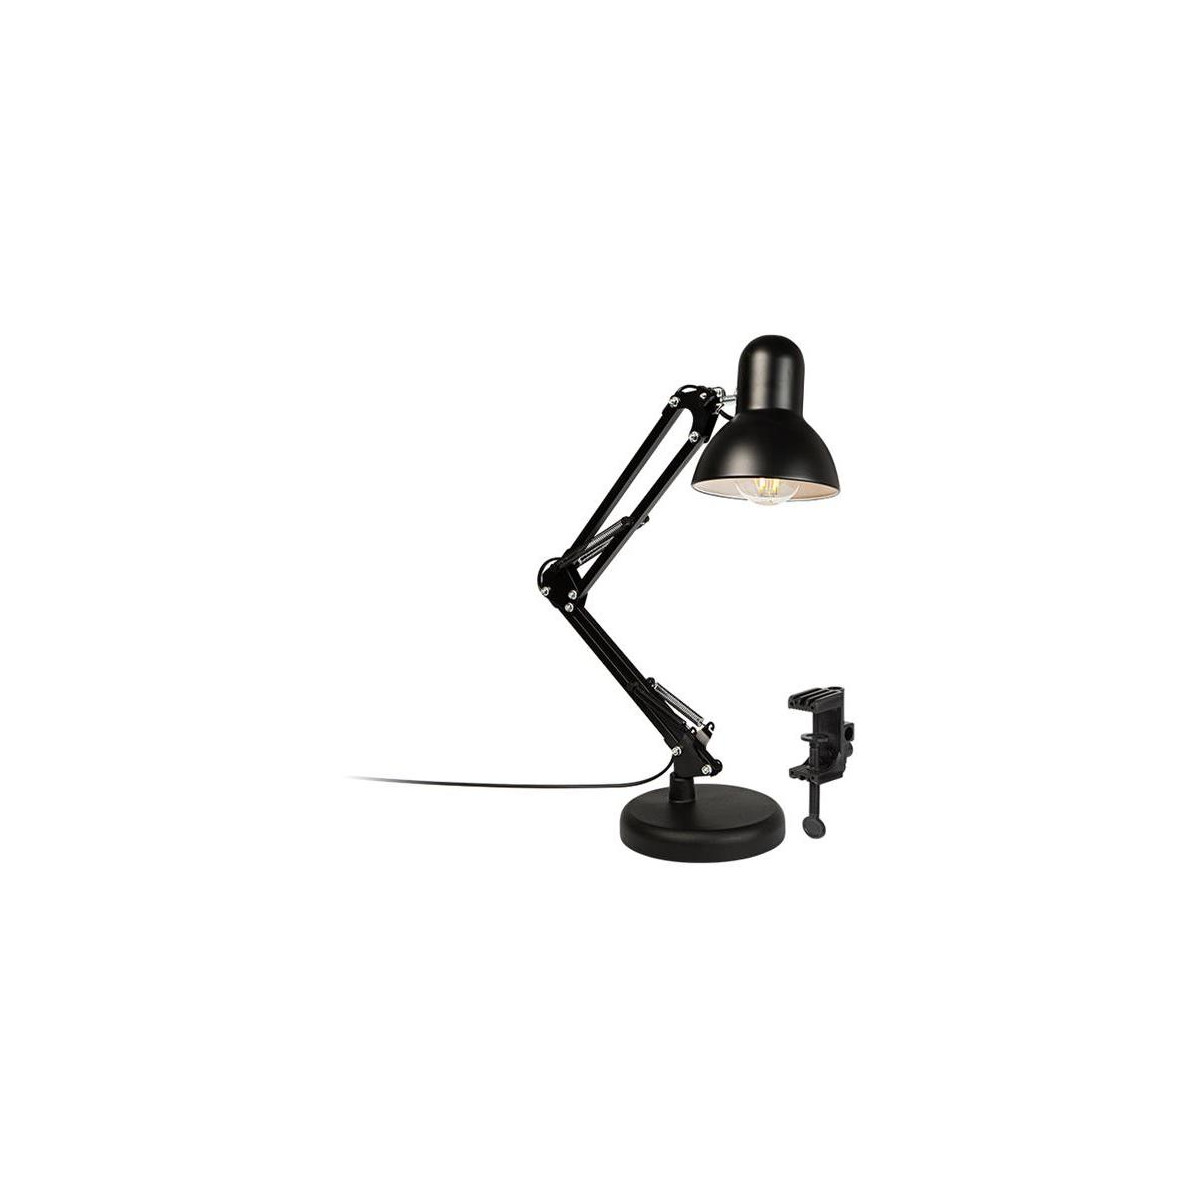 More about Lampa stolní BLOW LB-09